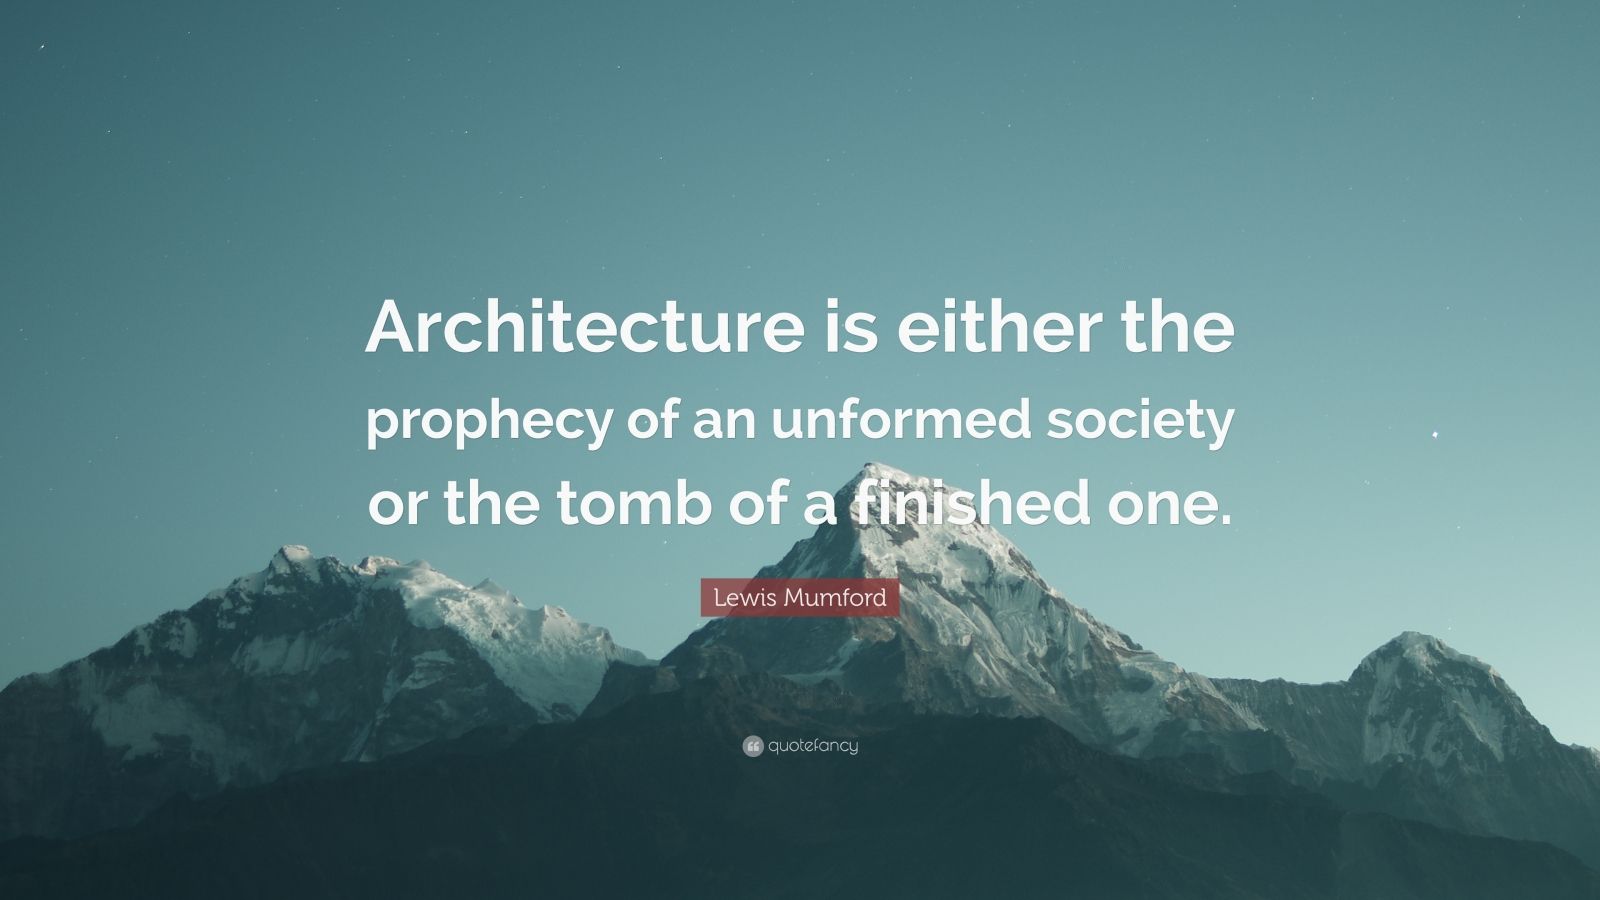 Lewis Mumford Quote: “Architecture is either the prophecy of an ...